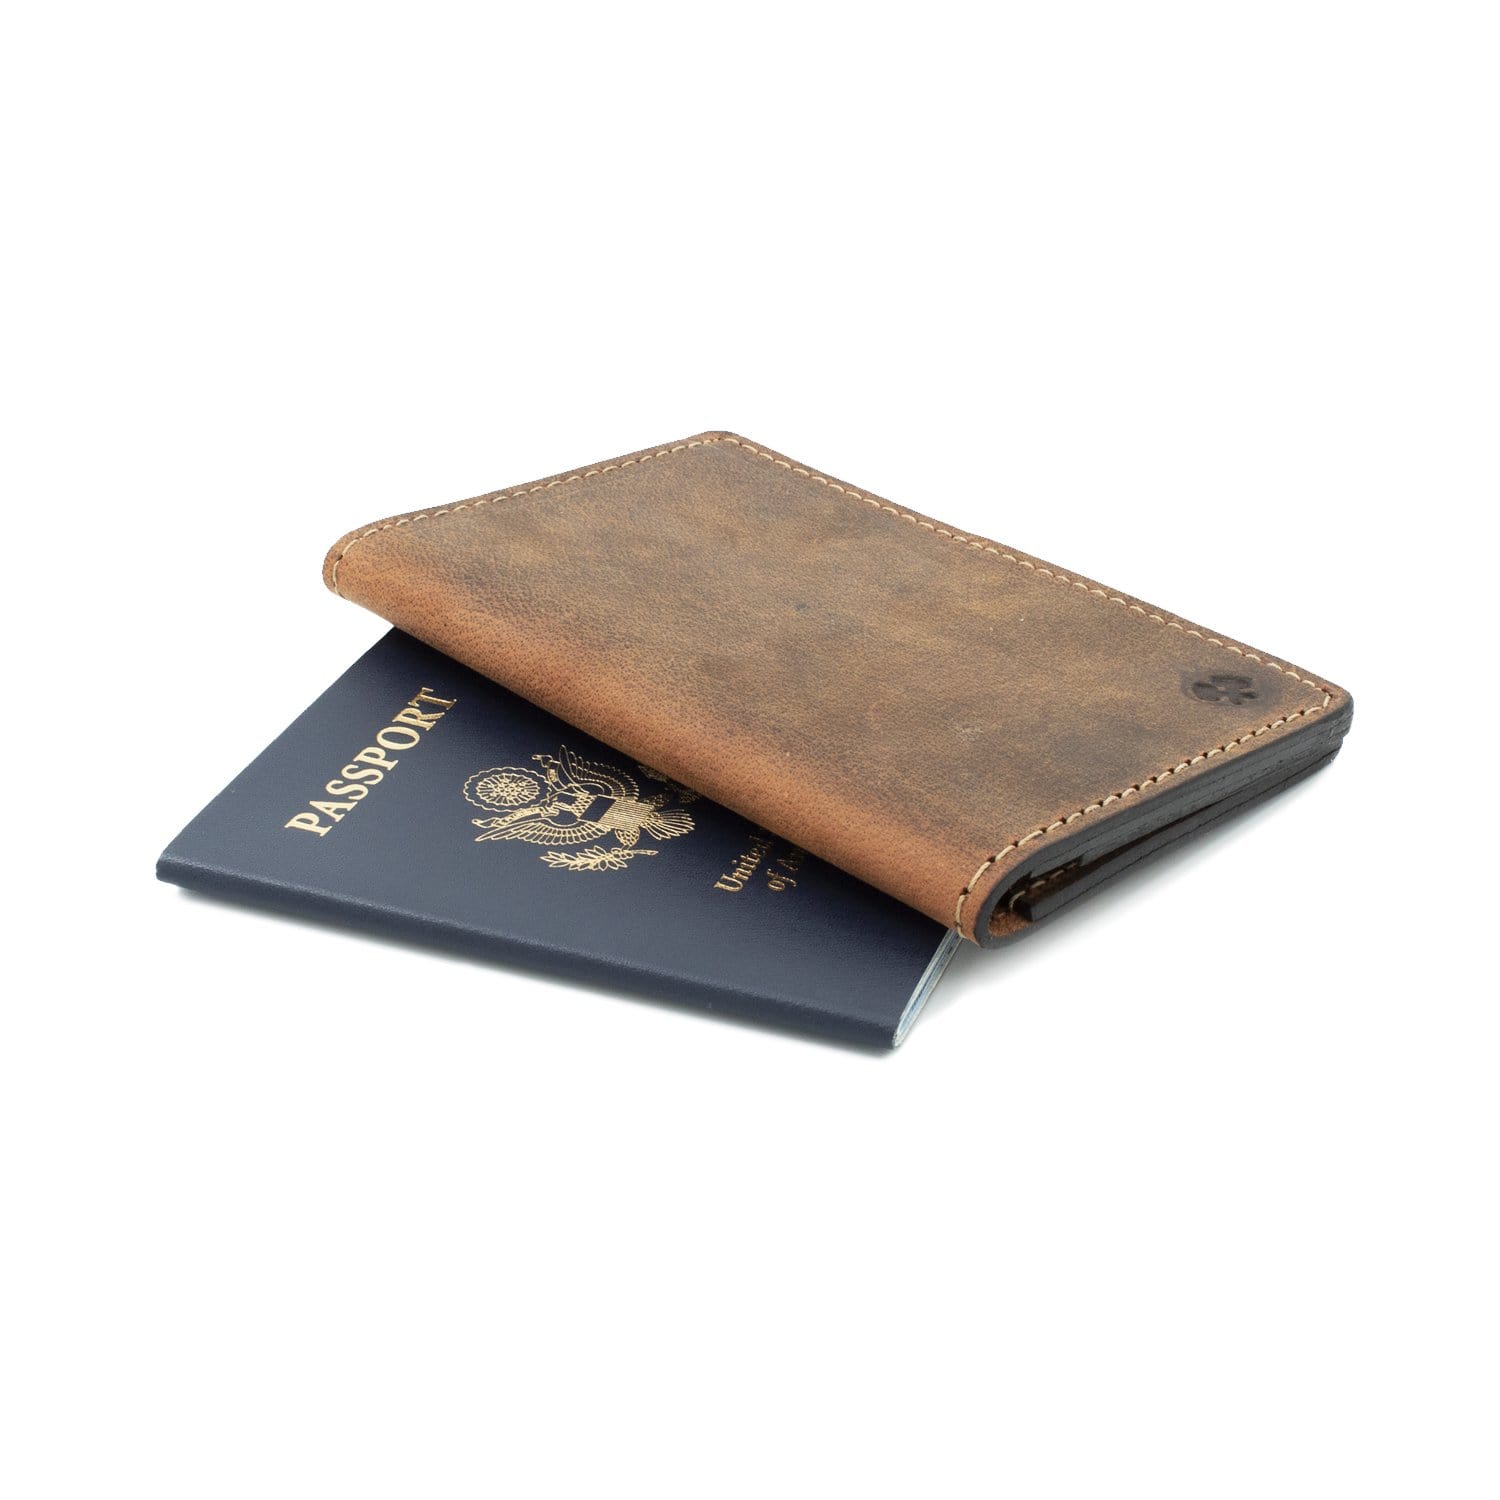 Ethically Crafted Sustainable Leather / Addis Leather Passport Holder / Rust Brown / Genuine Full Grain Leather / Parker Clay / Certified B Corp